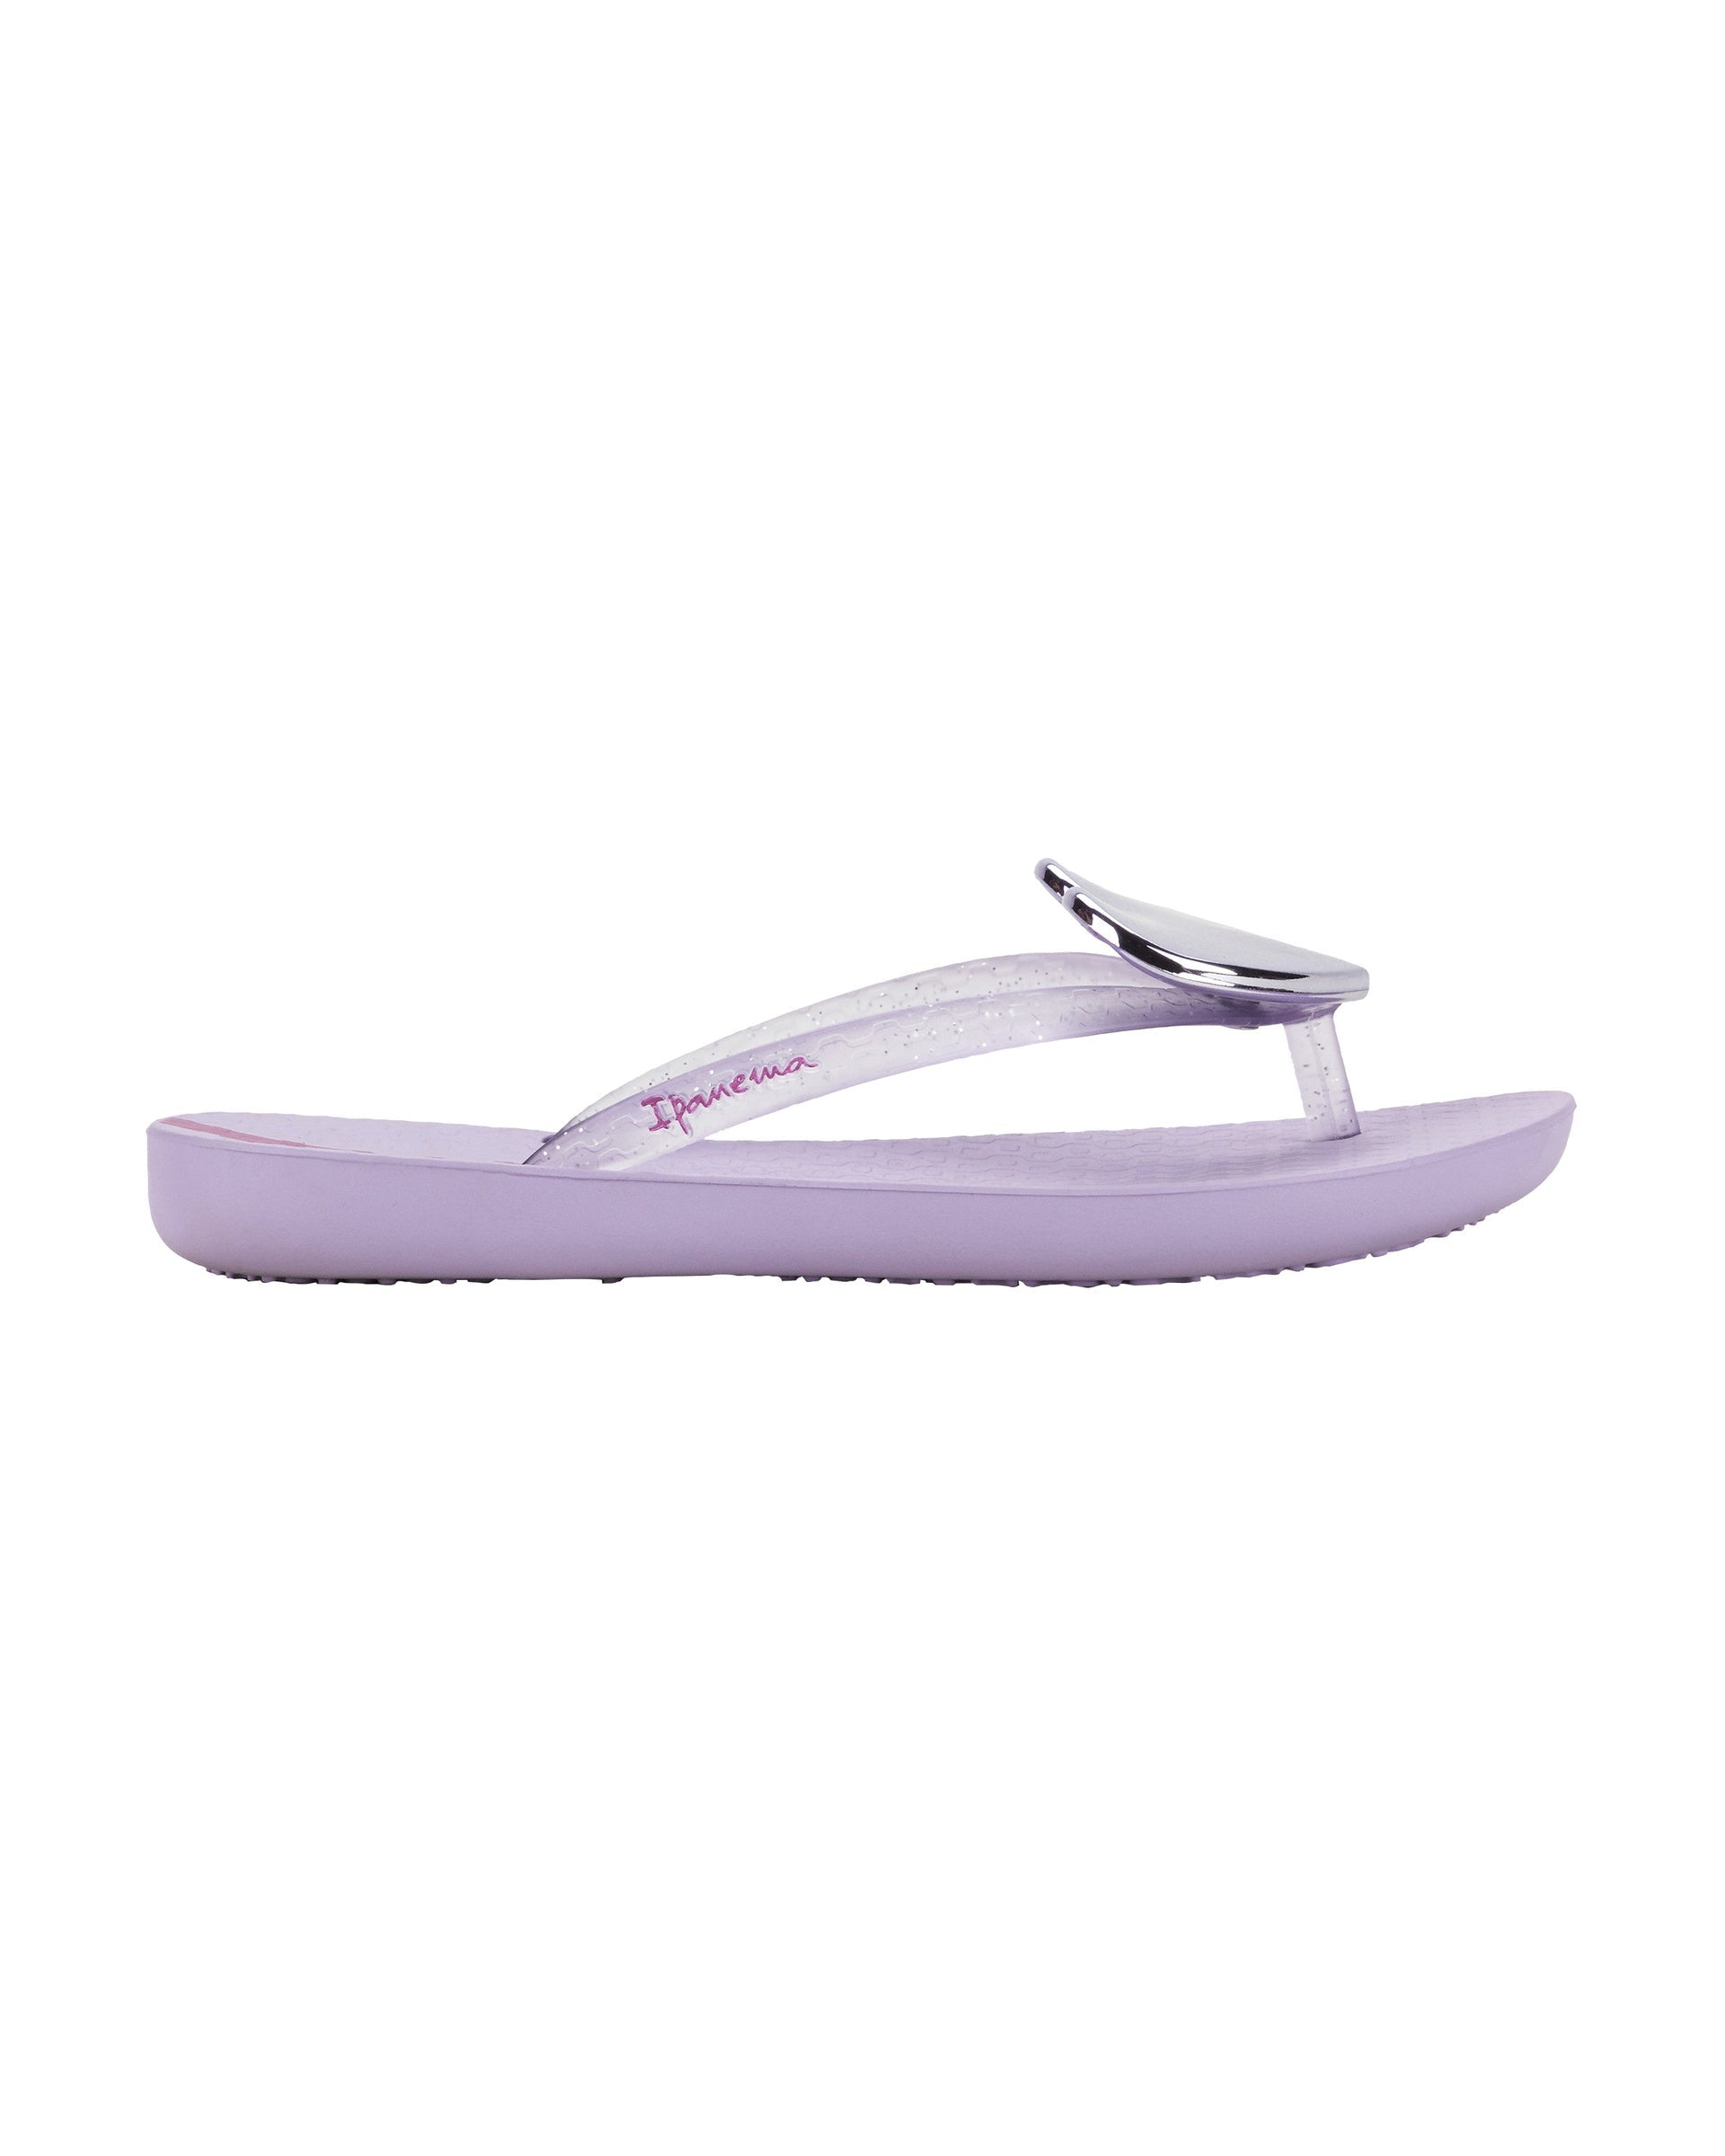 Outer side view of a purple Ipanema Wave Heart kids flip flop with silver decorative heart on the clear purple upper.